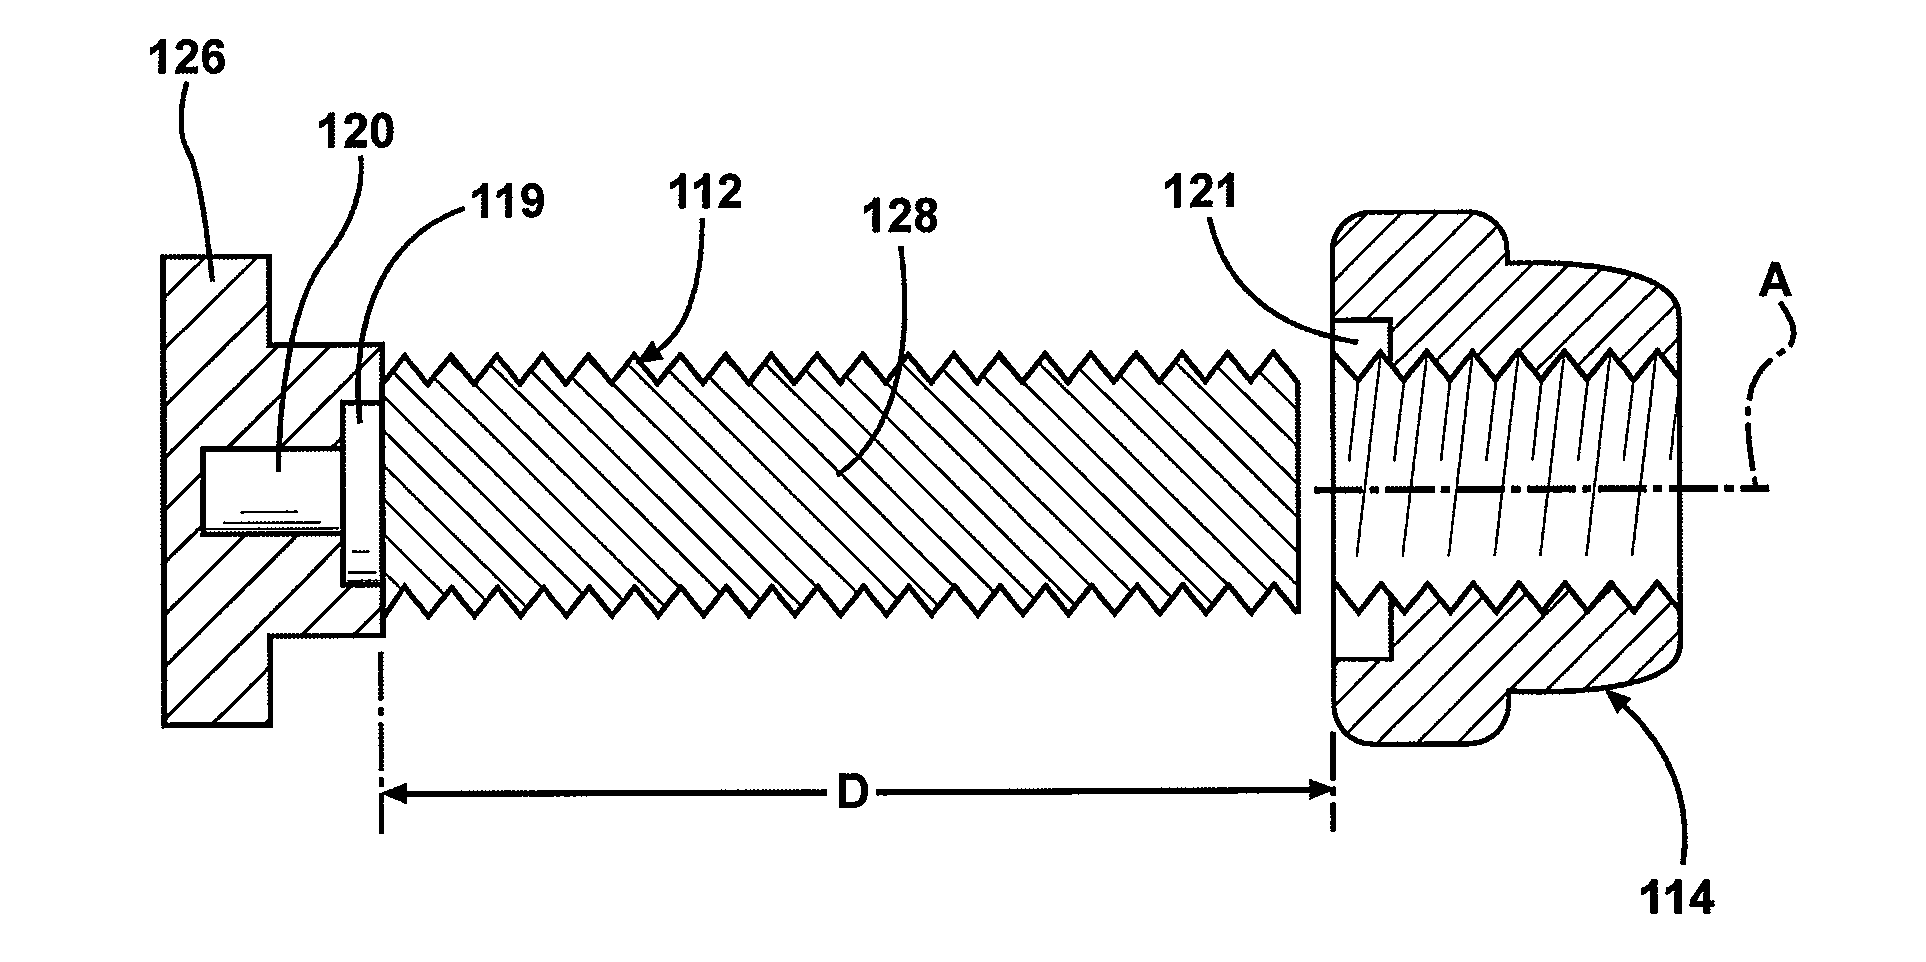 Lug stud and lug nut monitoring system, method, and components therefor